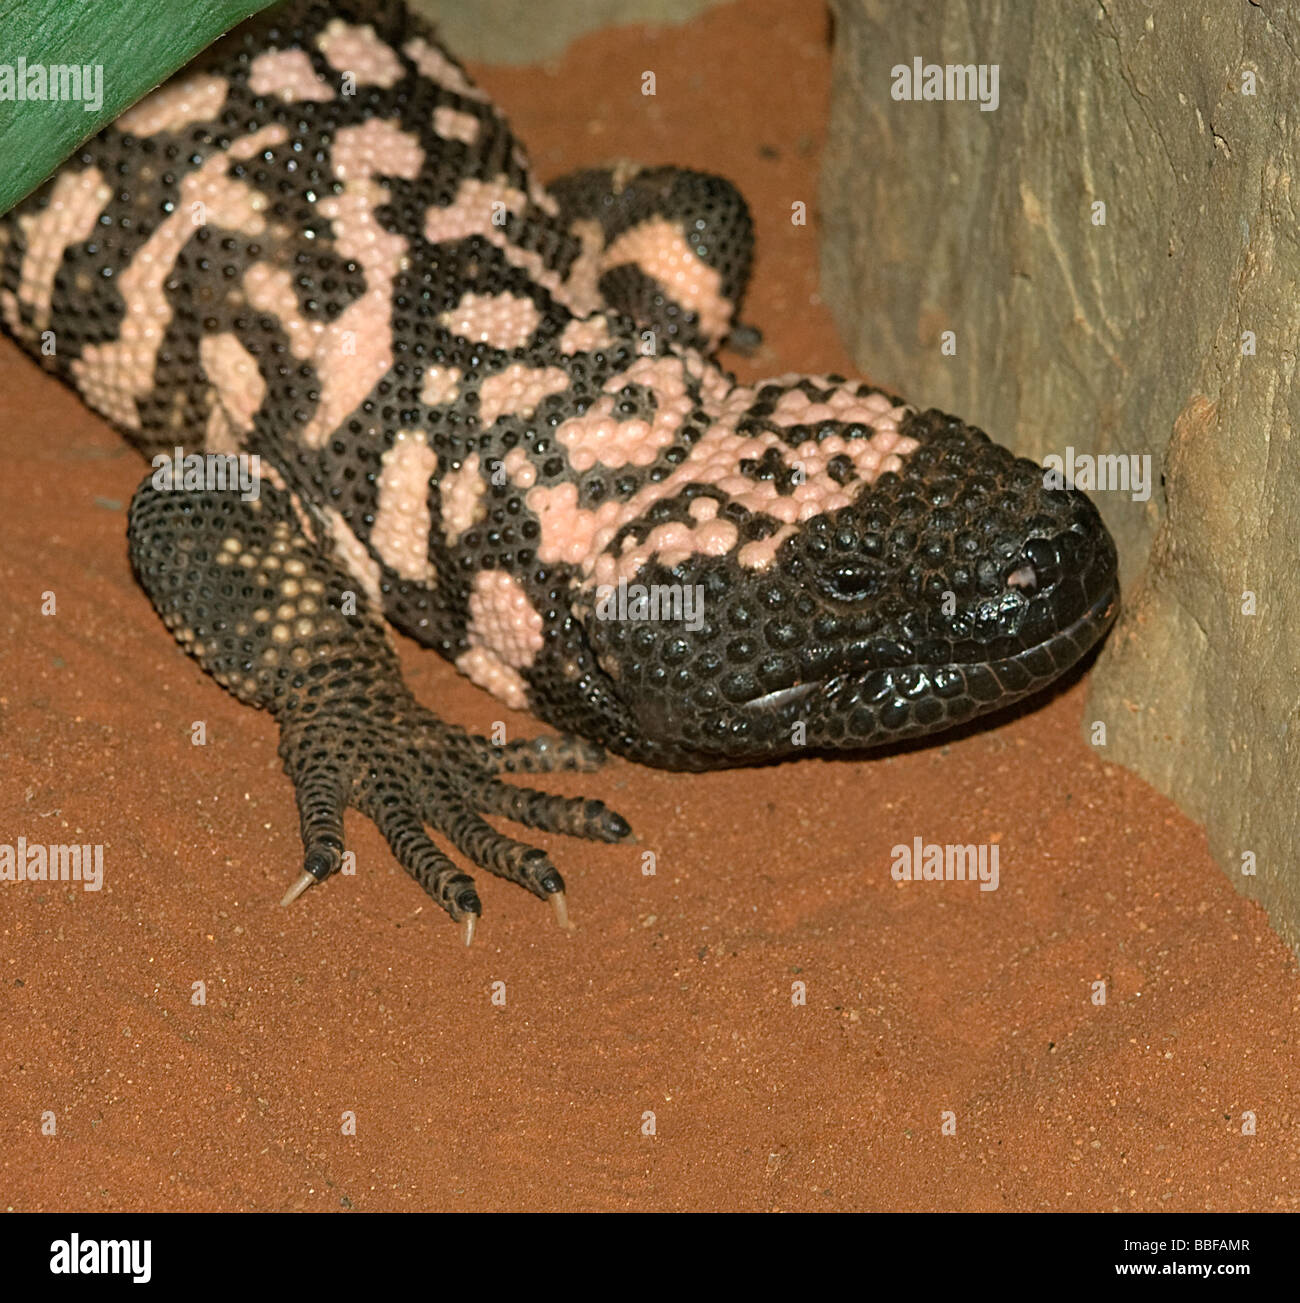 Head of gila monster from USA deserts Stock Photo